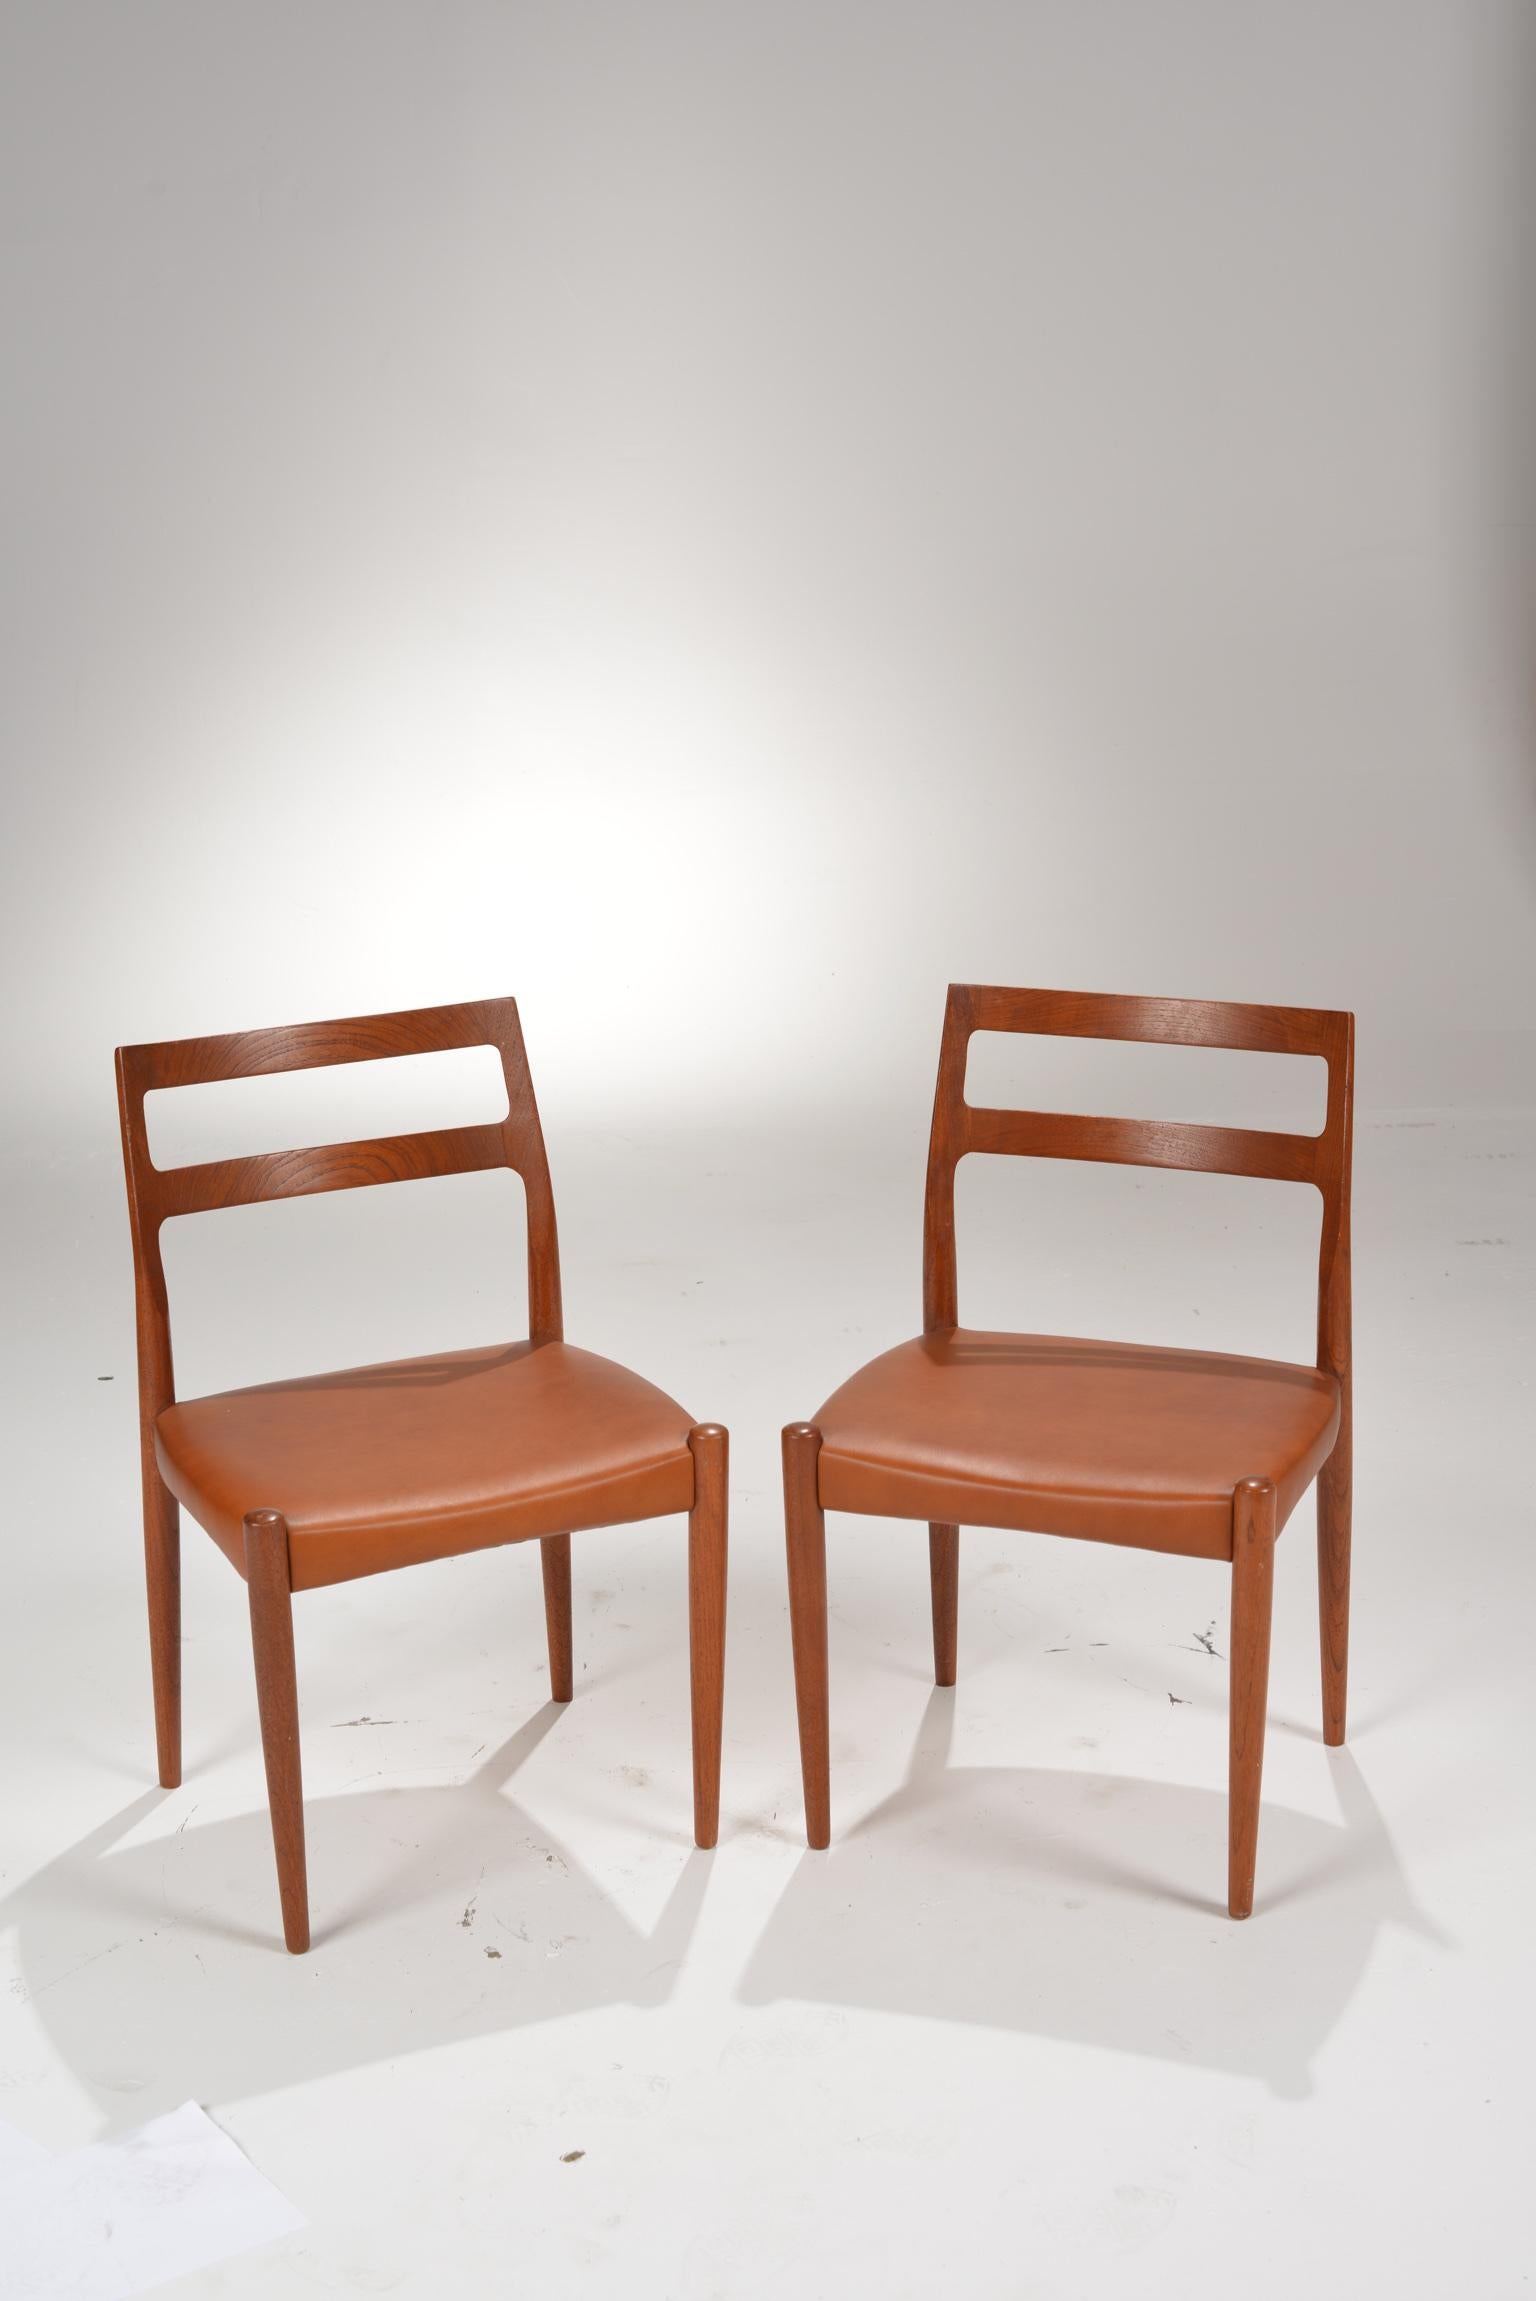 Set of two Danish modern dining chairs by Johannes Andersen for Uldum Møbelfabrik, sculpted from teak with new leather upholstery, and in the style of Niels Otto Moller.